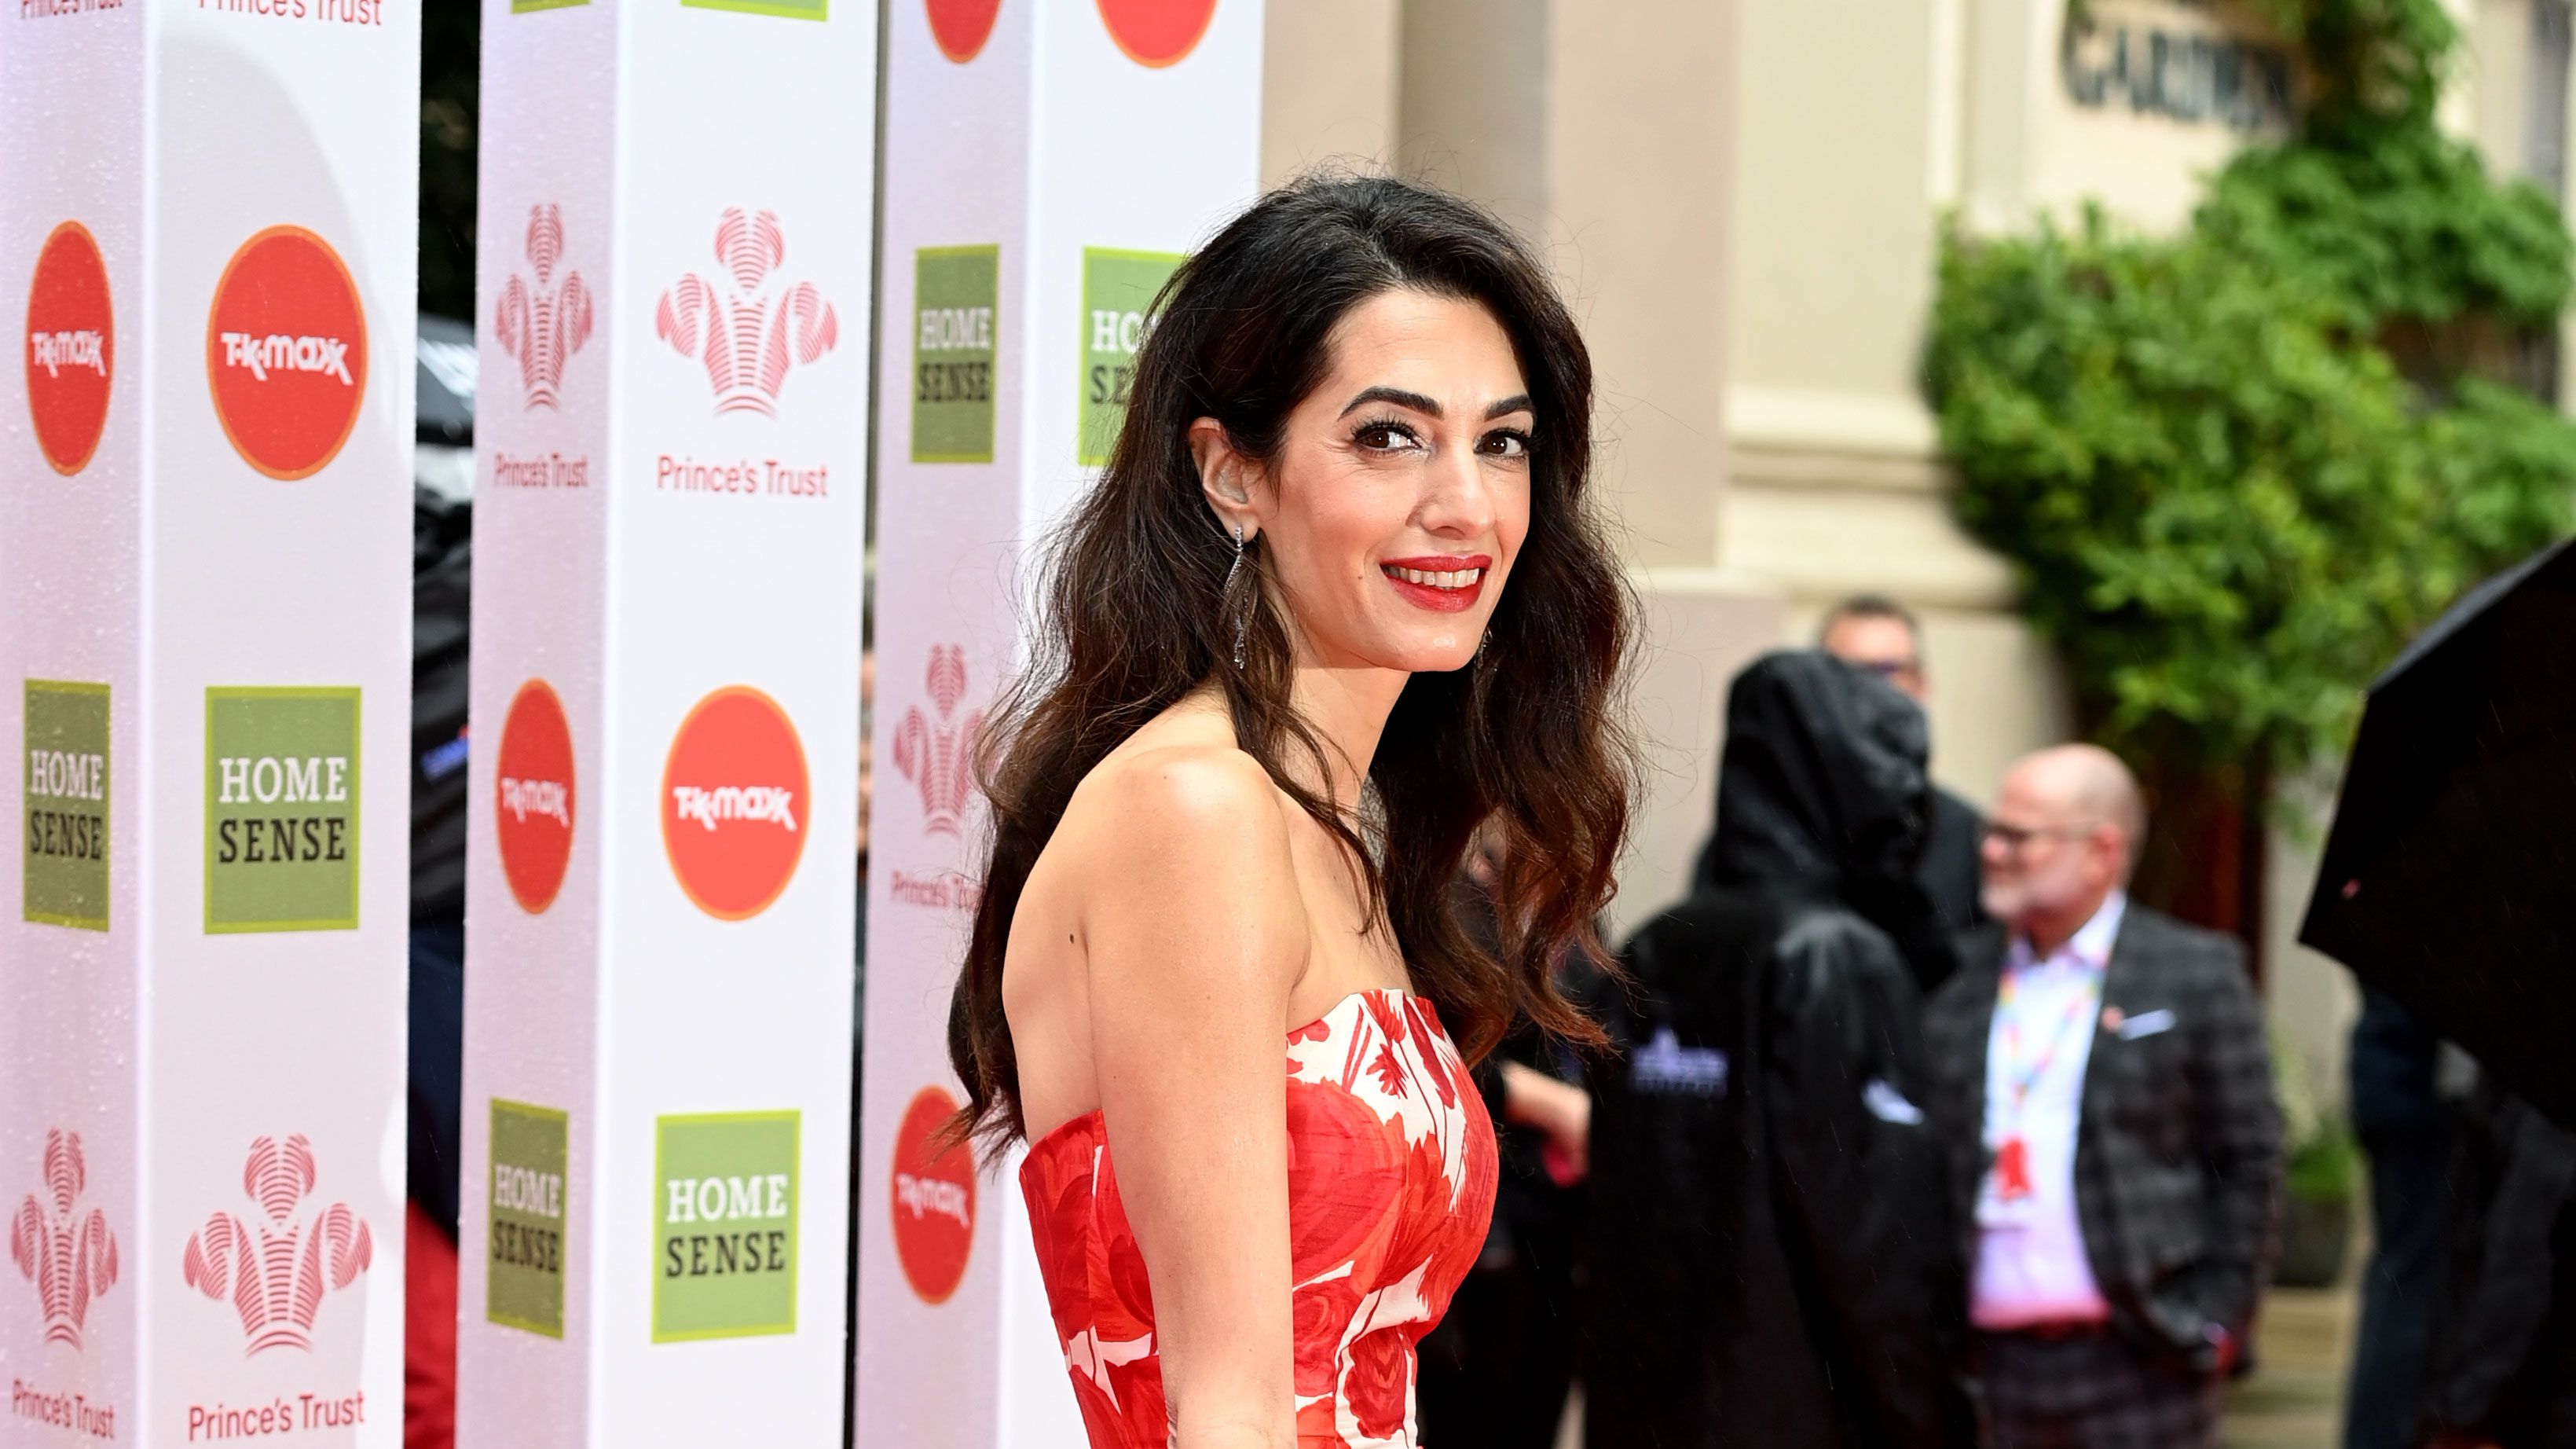 Amal Clooney hails the return of the bubble skirt at Cannes Film